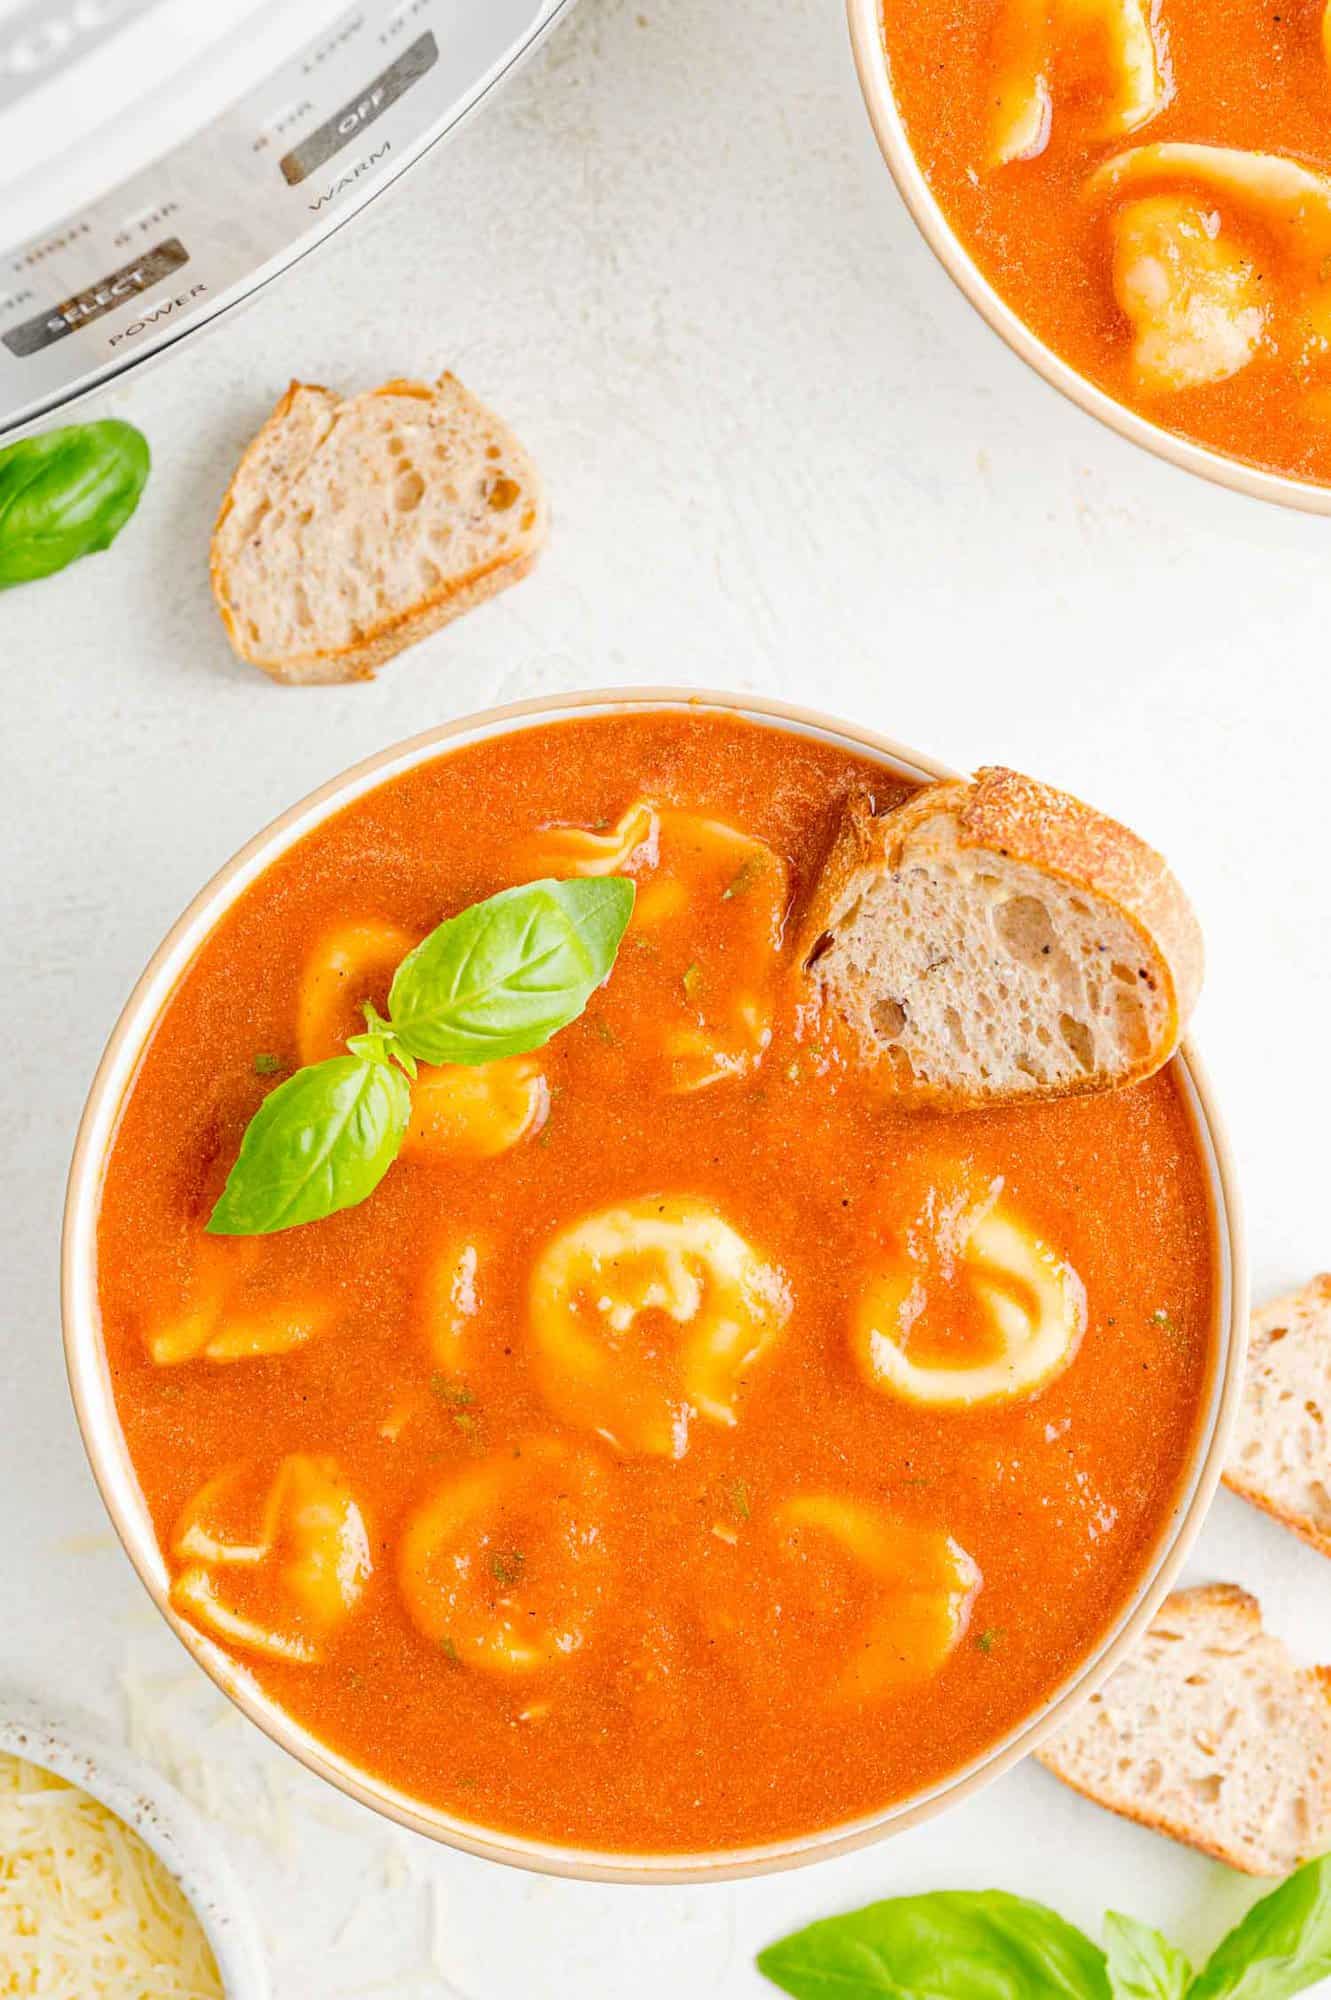 White bowl containing tomato soup with tortellini, garnished with fresh basil.